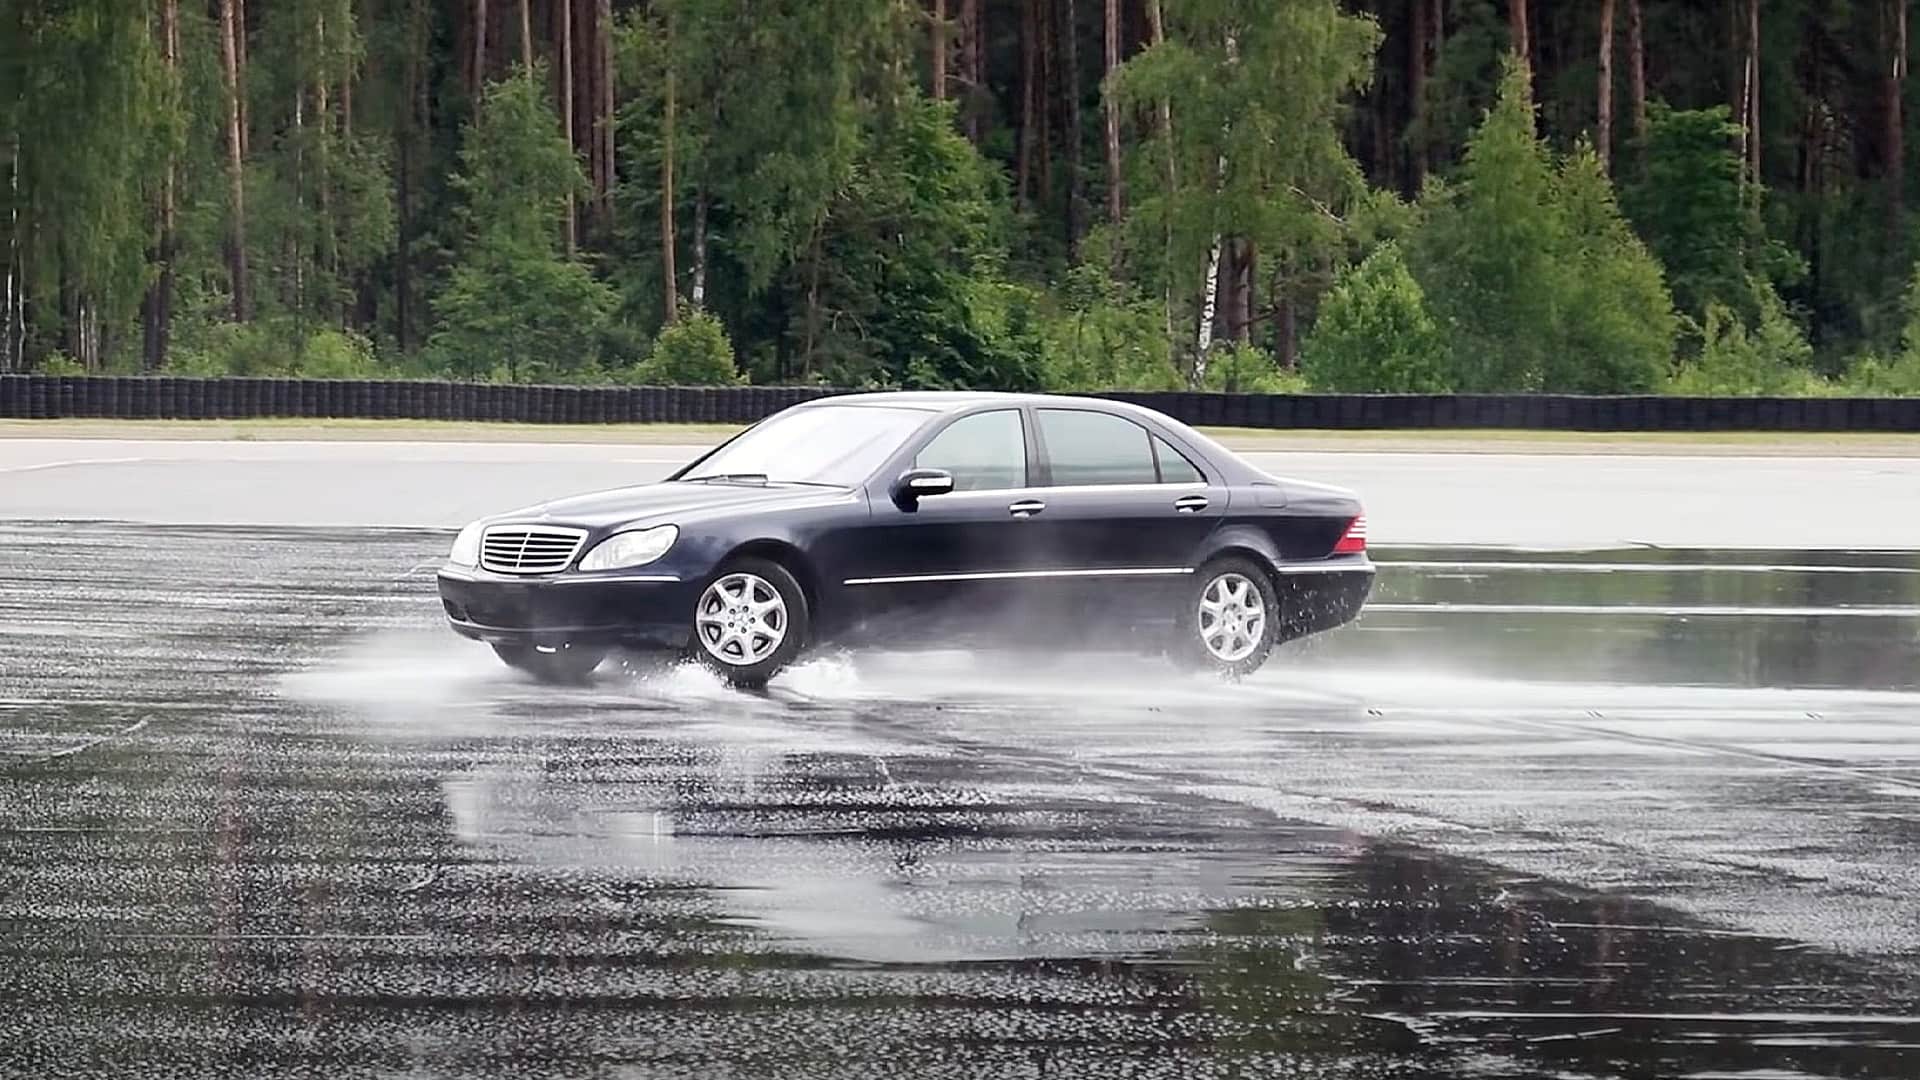 Car spinning out on wet road